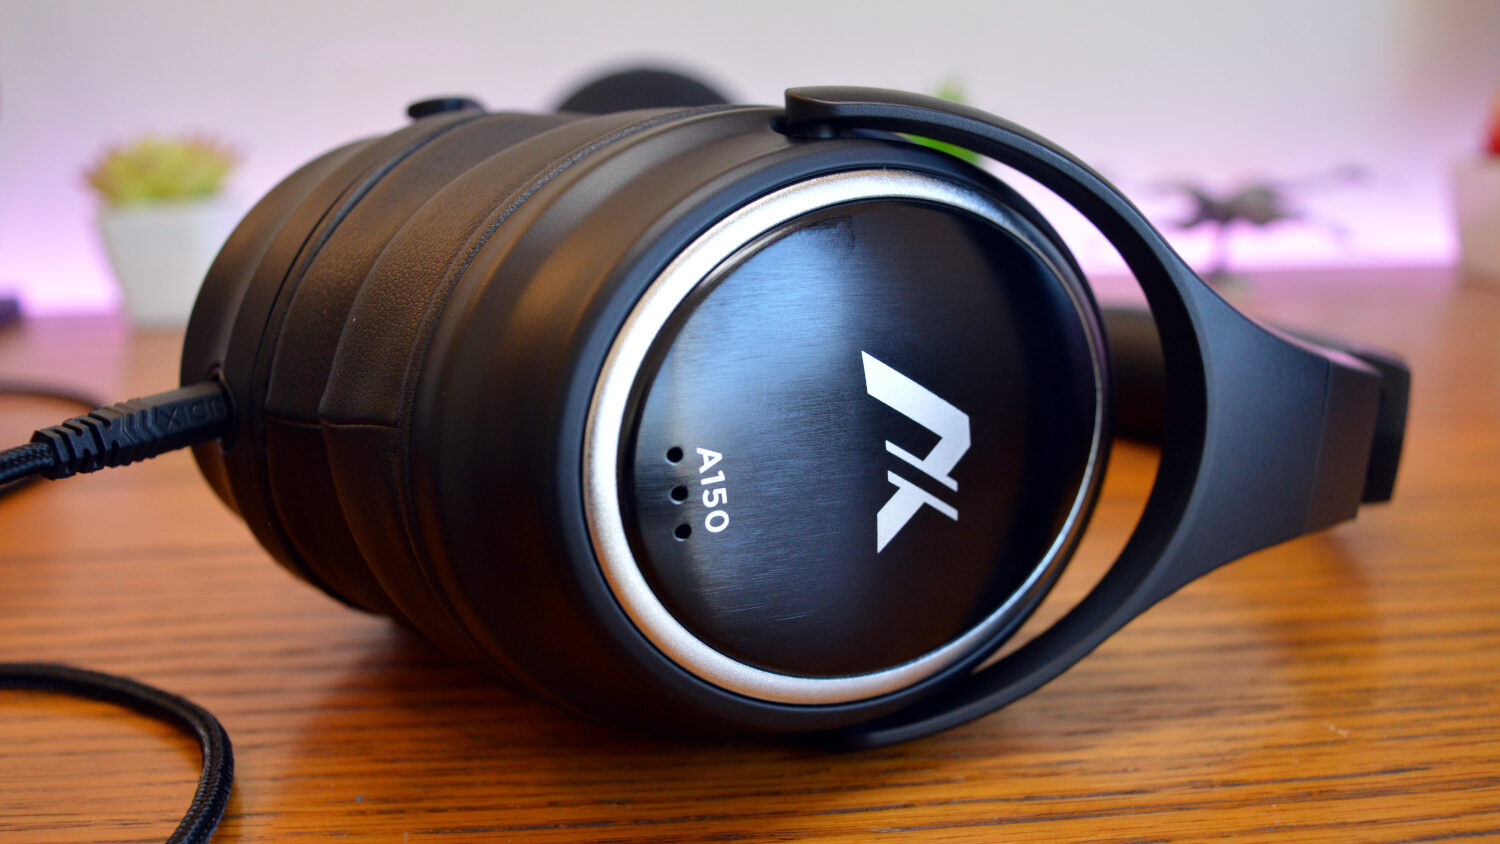 Audix A150 studio reference headphones review